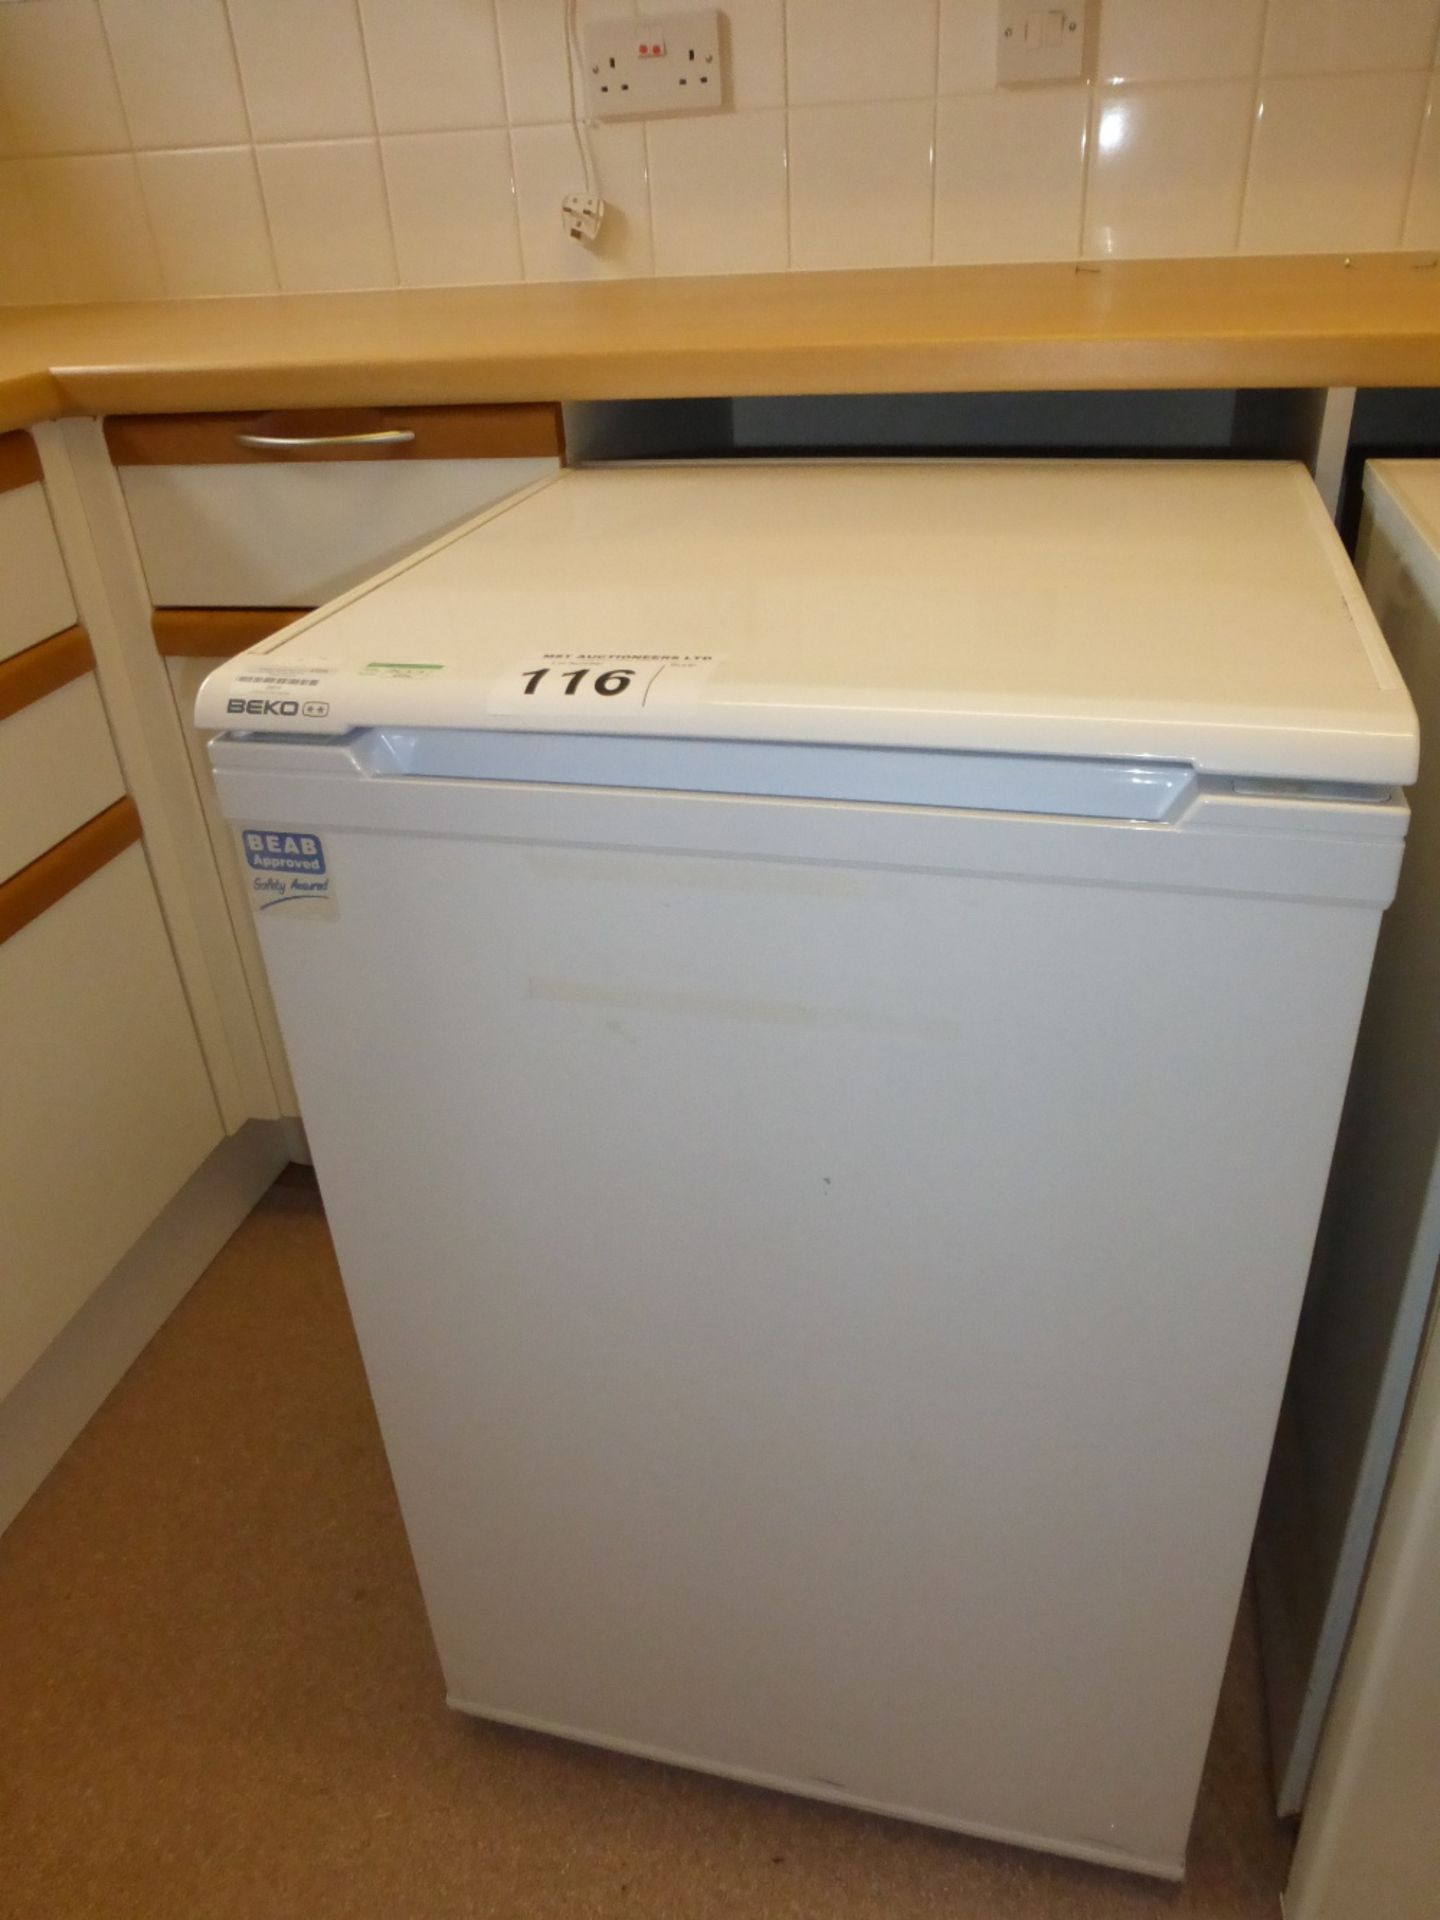 A Beko under counter refrigerator (located in room 40.